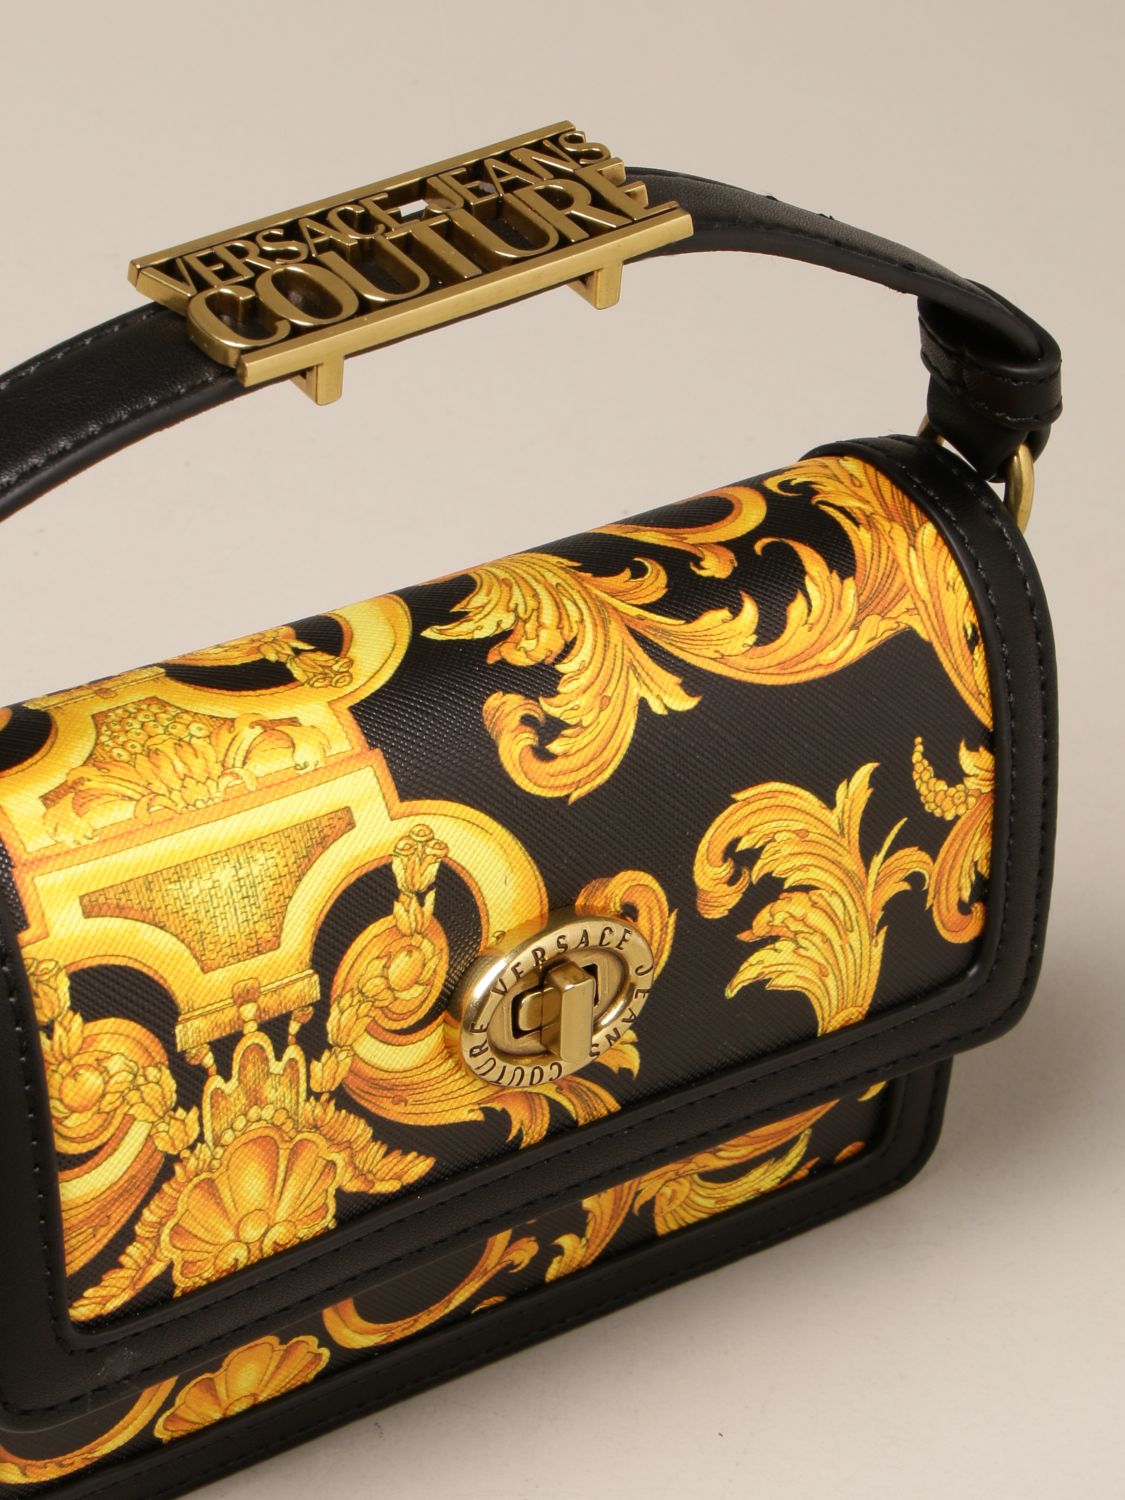 Versace Jeans Couture Bag in Synthetic Nappa with Mirror